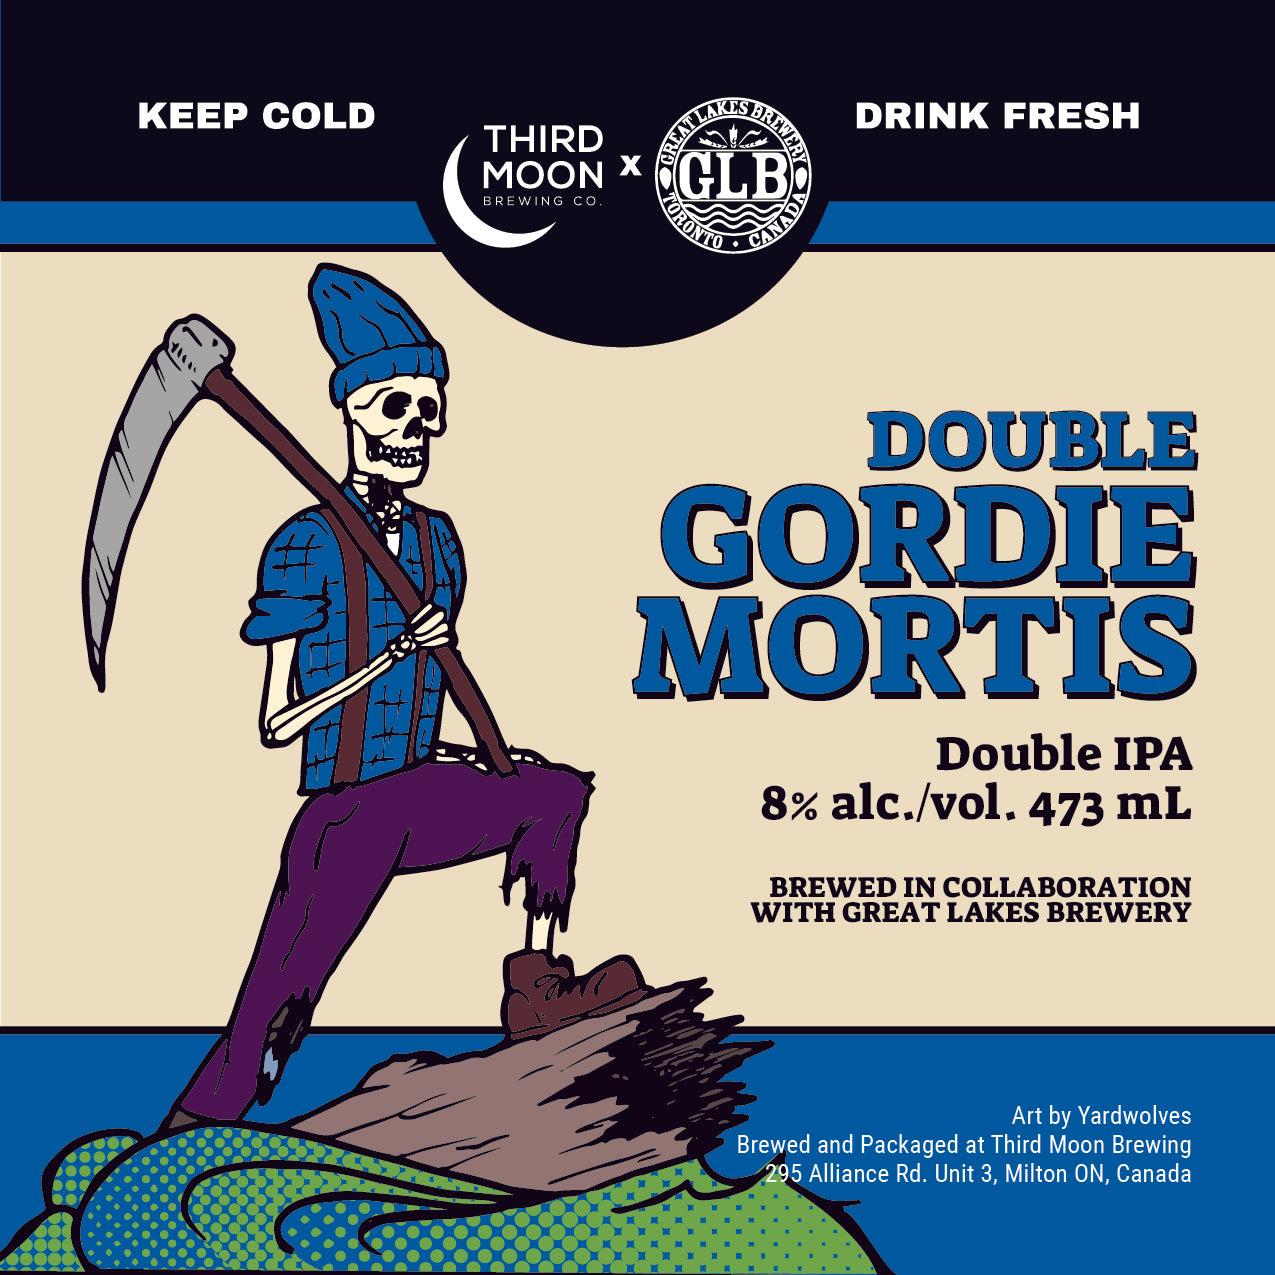 Double IPA - 4-pk of "Double Gordie Mortis" tall cans